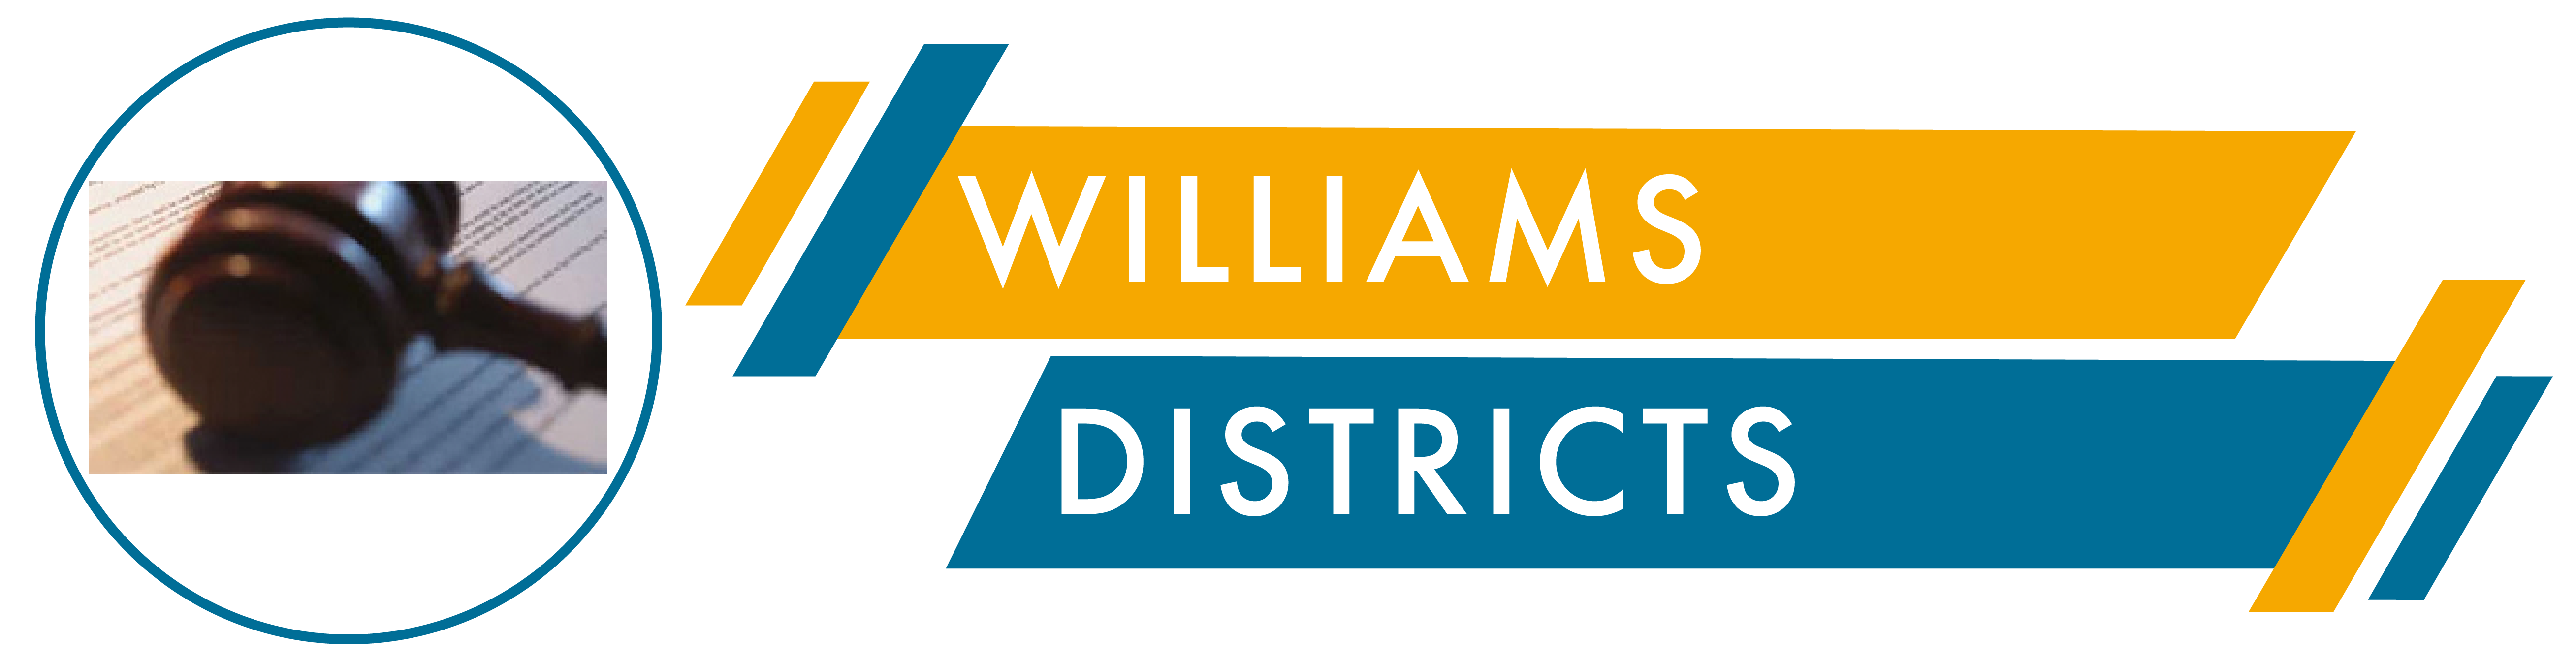 Williams Districts Banner